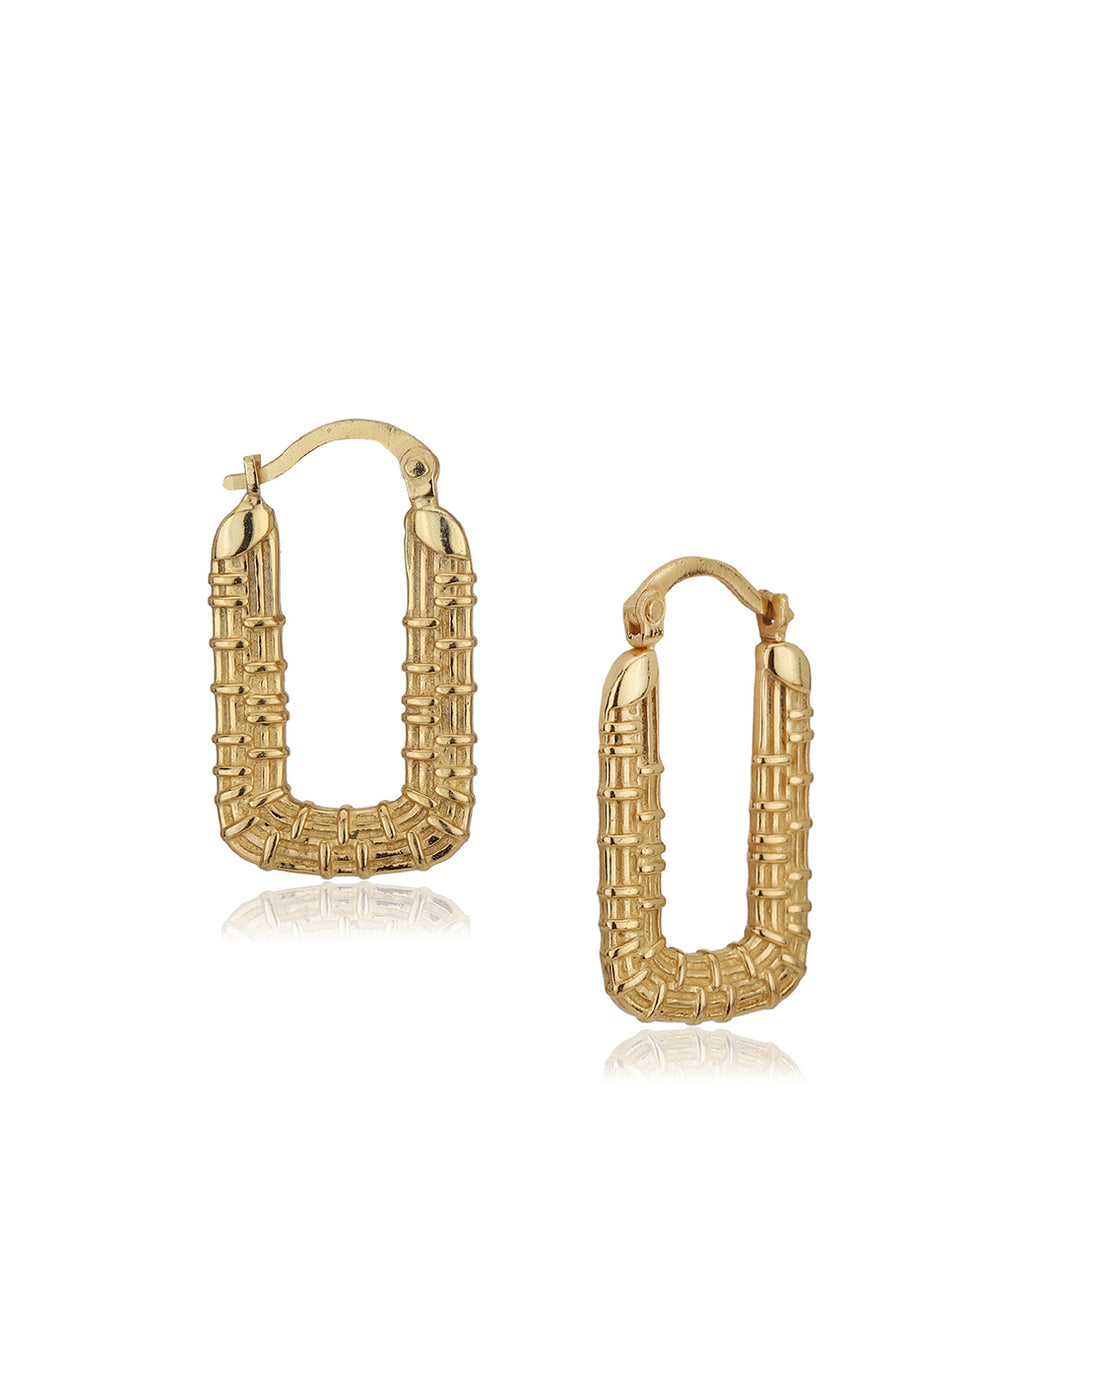 Carlton London Gold Plated Contemporary Hoop Earring For Women